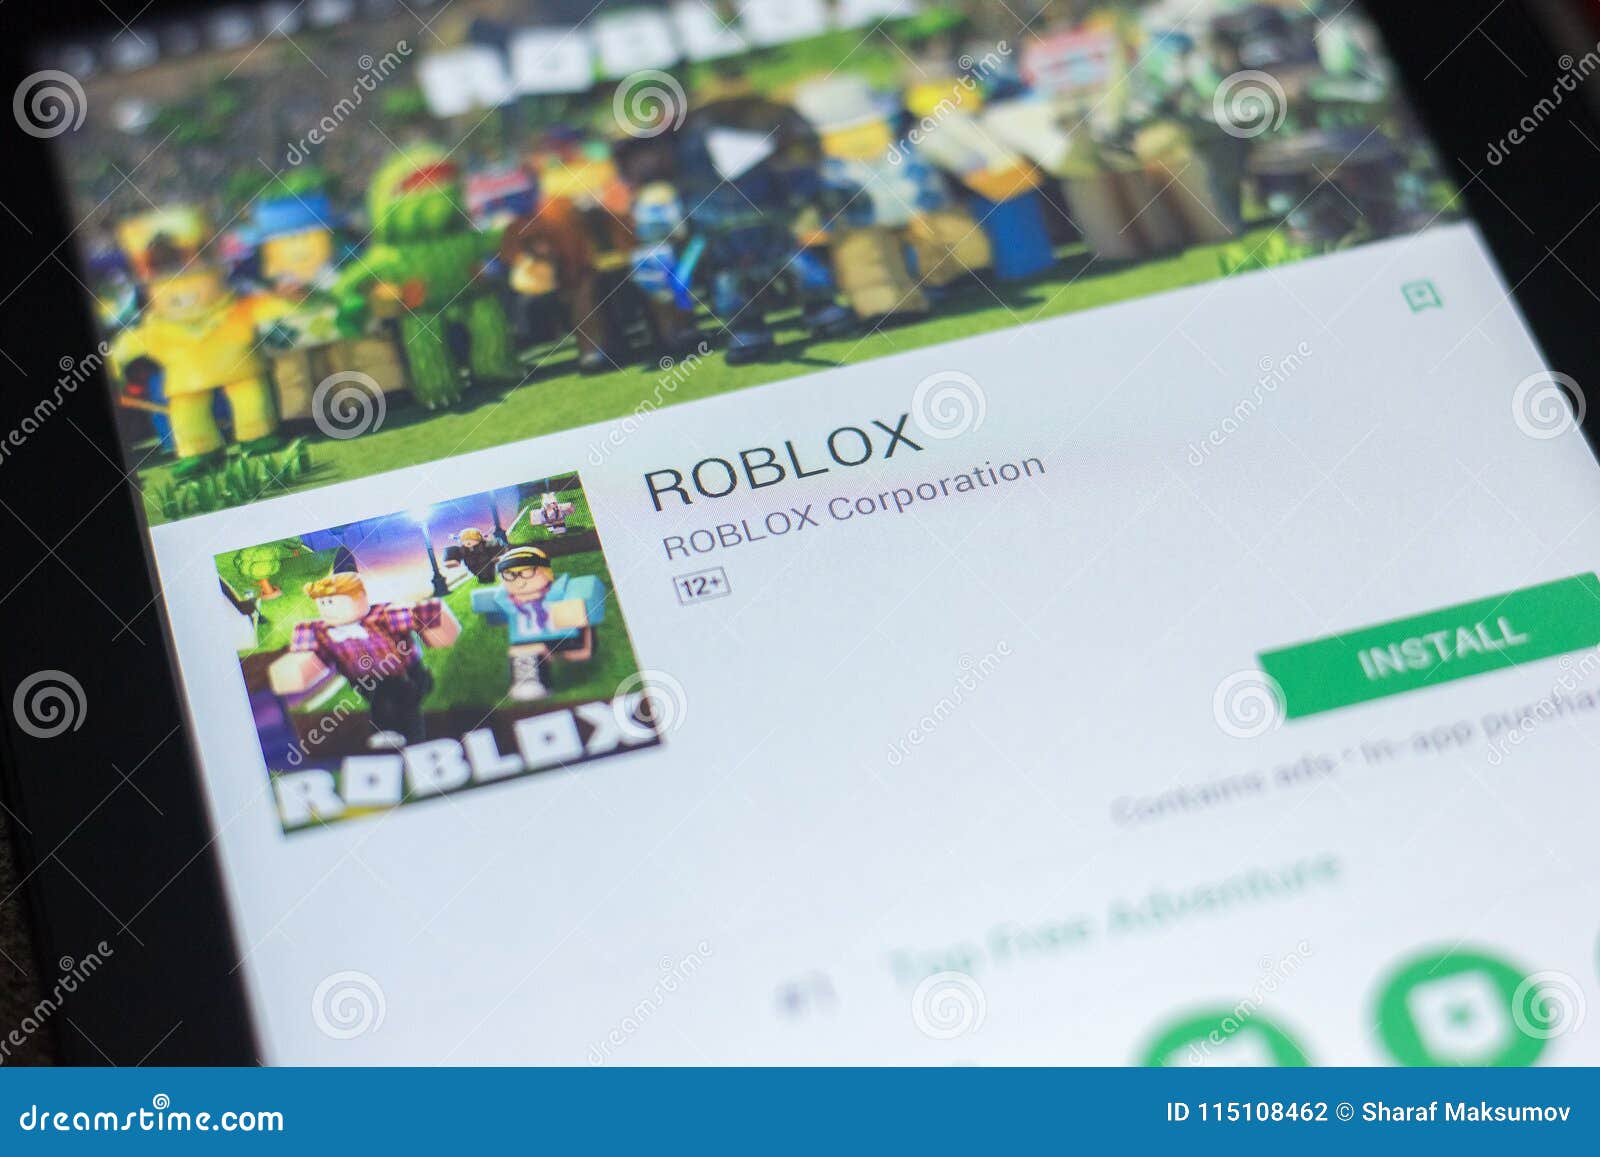 Roblox Photos Free Royalty Free Stock Photos From Dreamstime - roblox url downloader